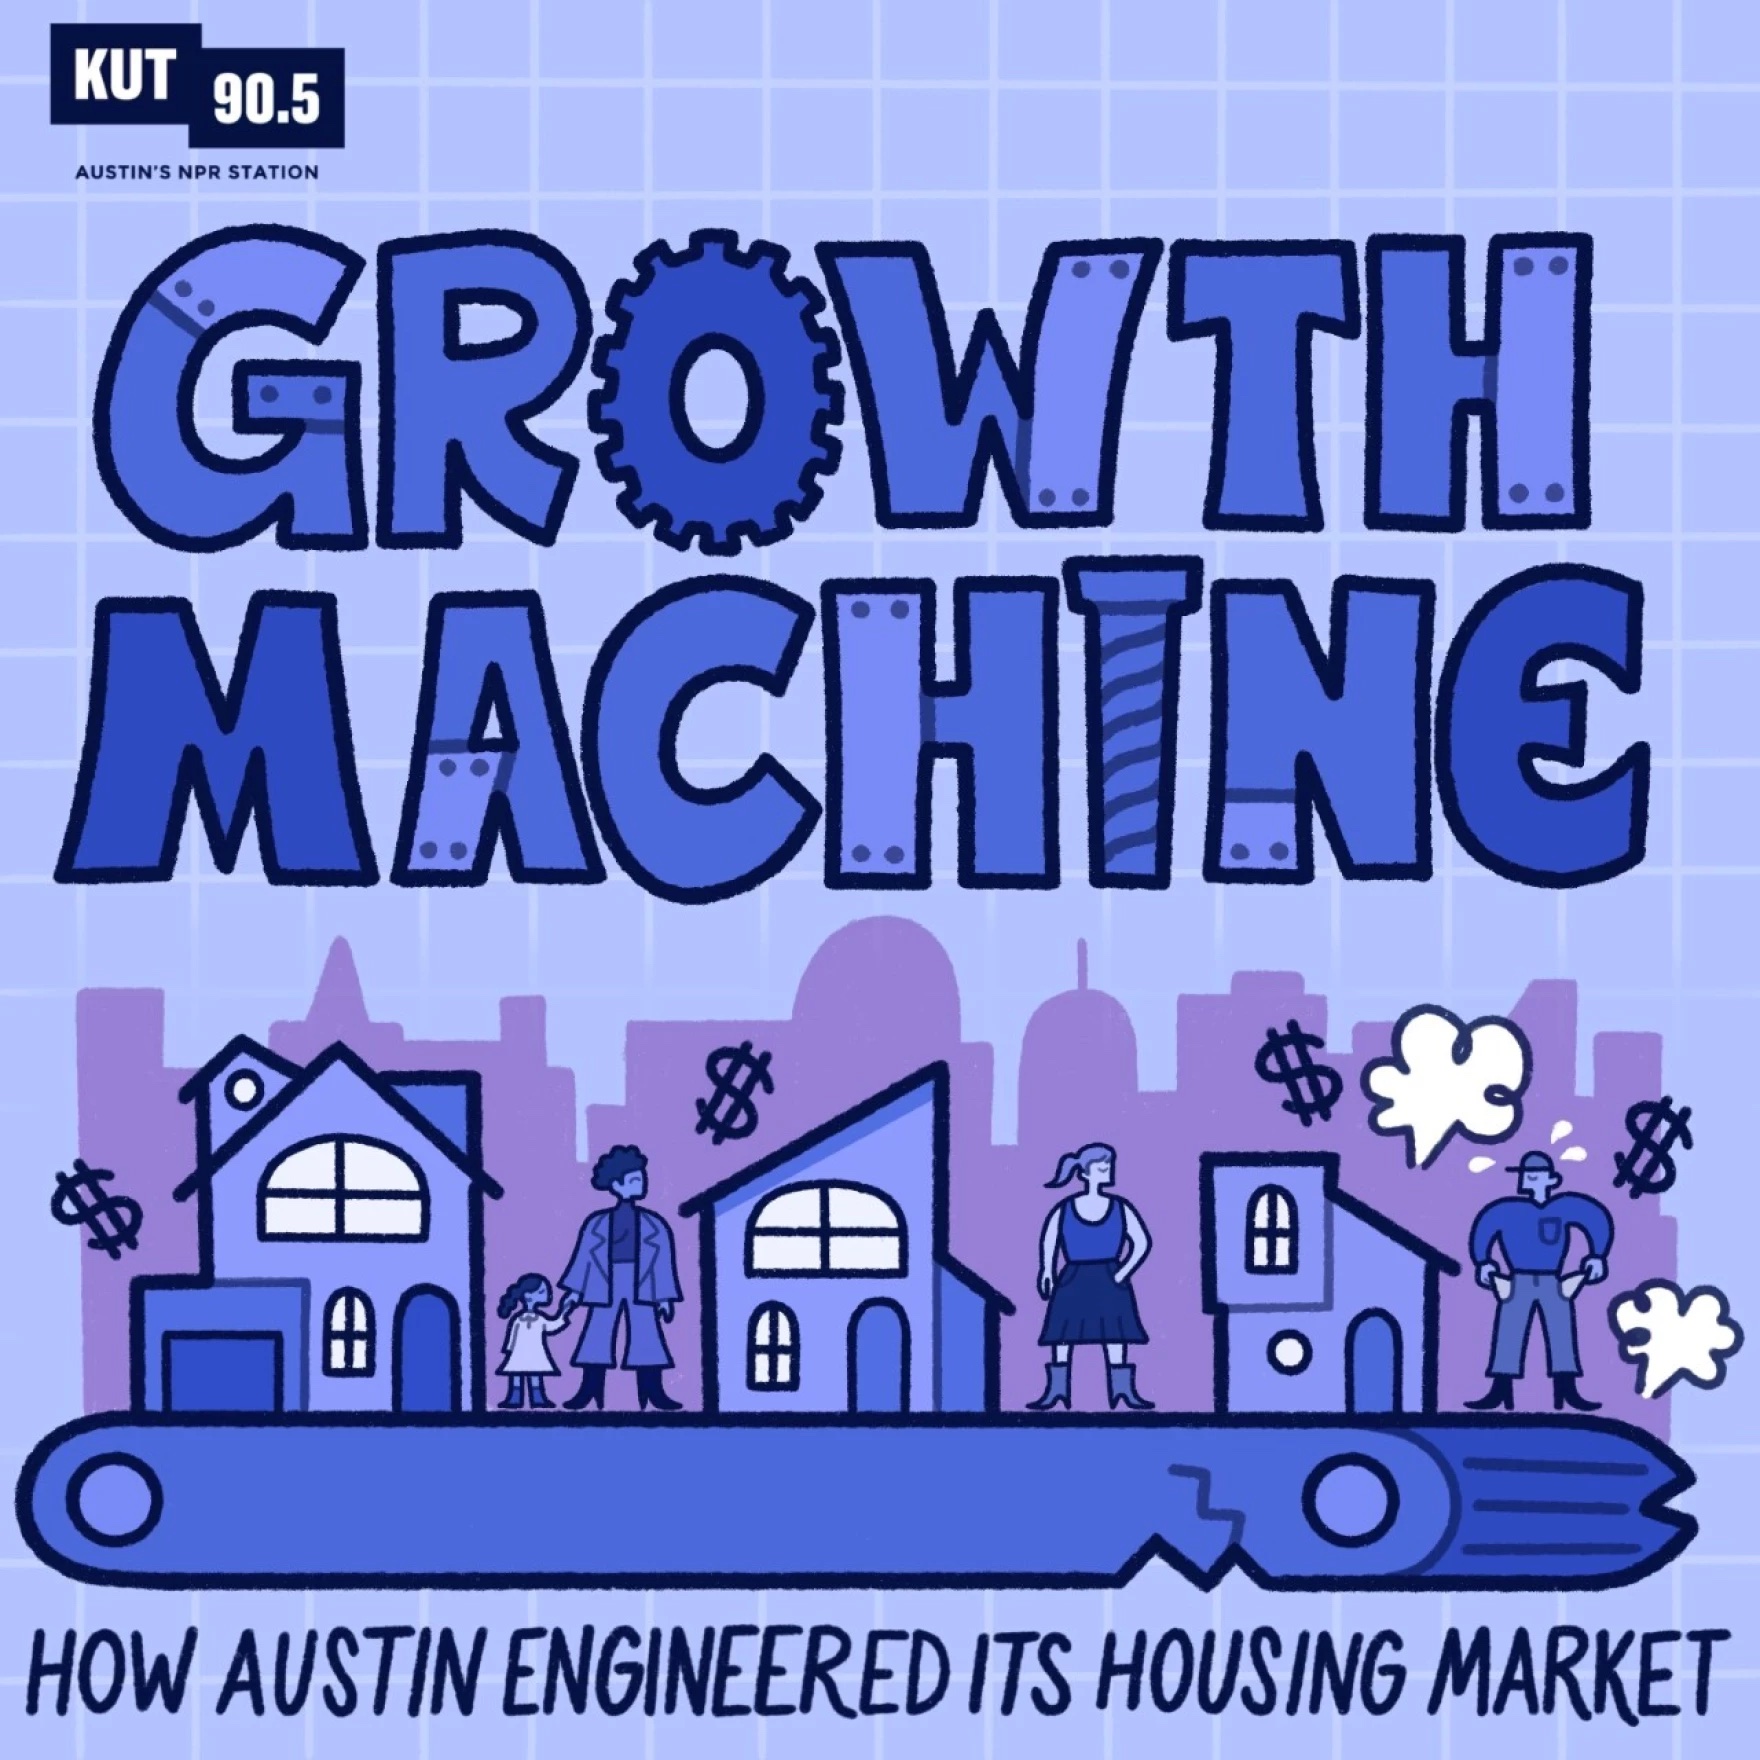  KUT/Austin’s ‘Growth Machine’ Podcast Looks At Explosive Growth Of Local Housing Market